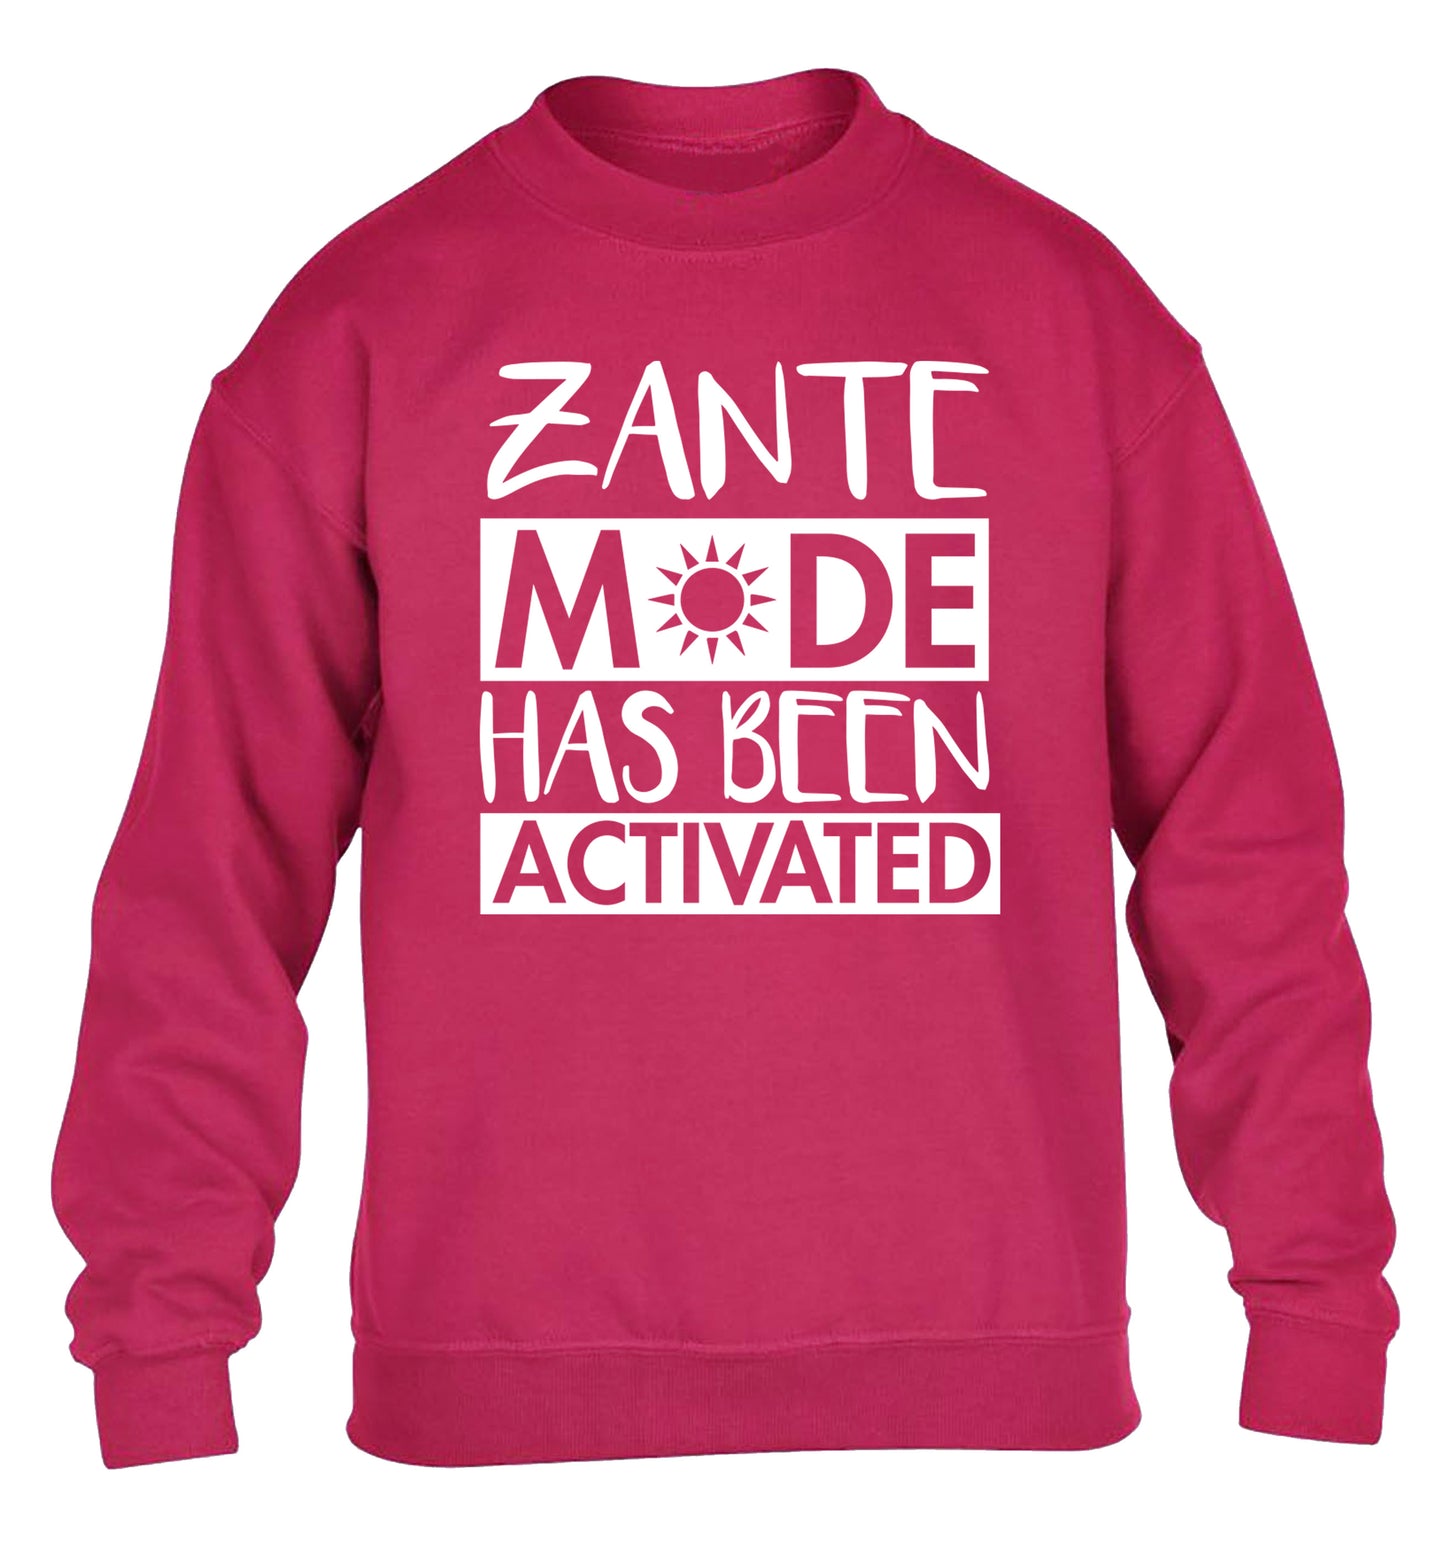 Zante mode has been activated children's pink sweater 12-13 Years